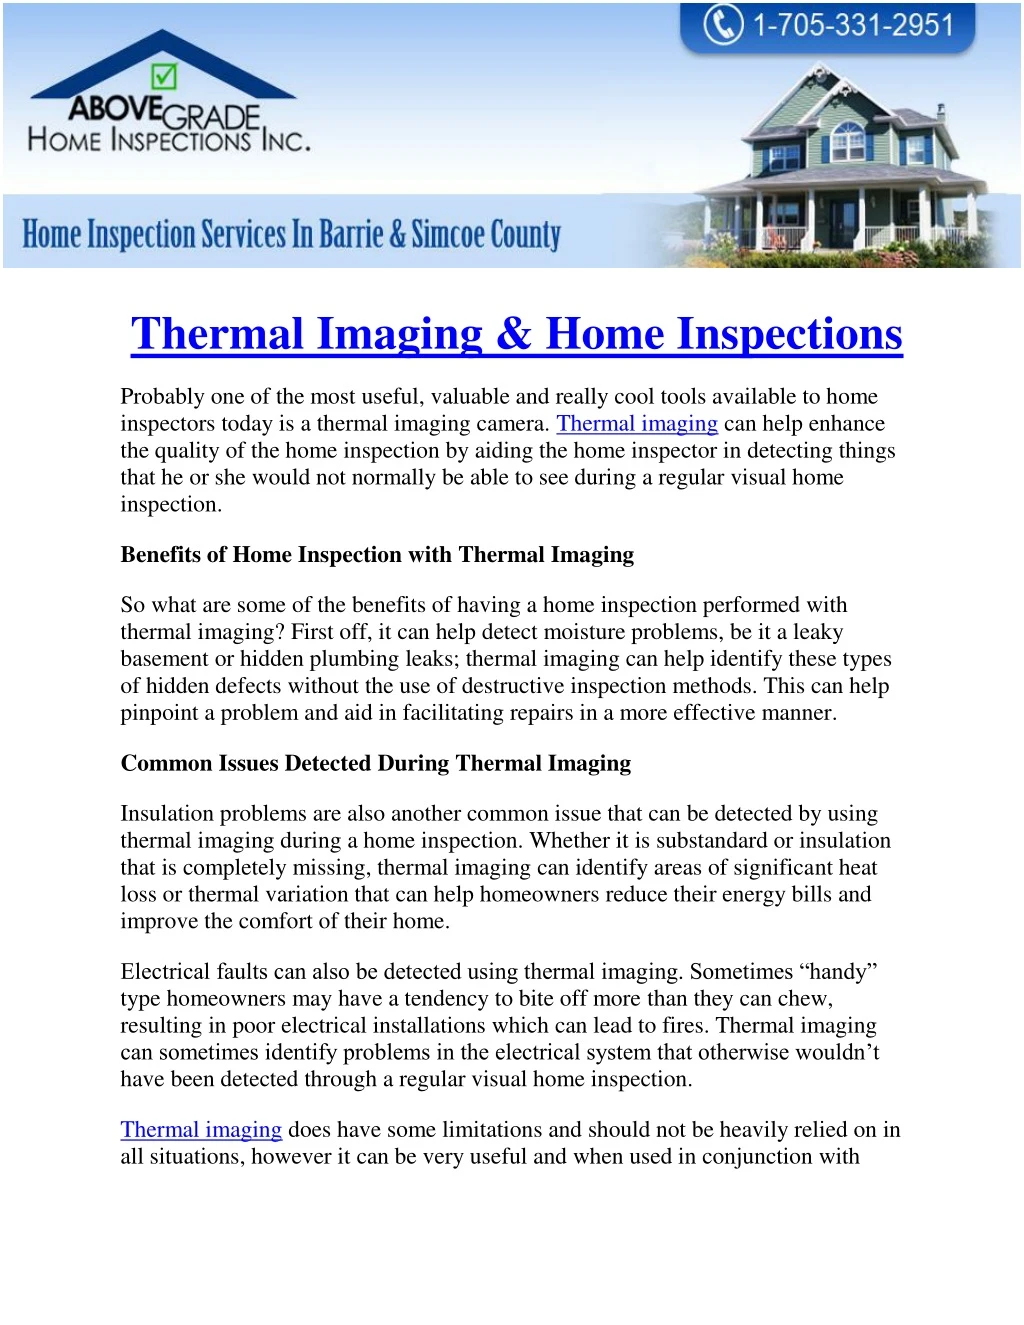 thermal imaging home inspections